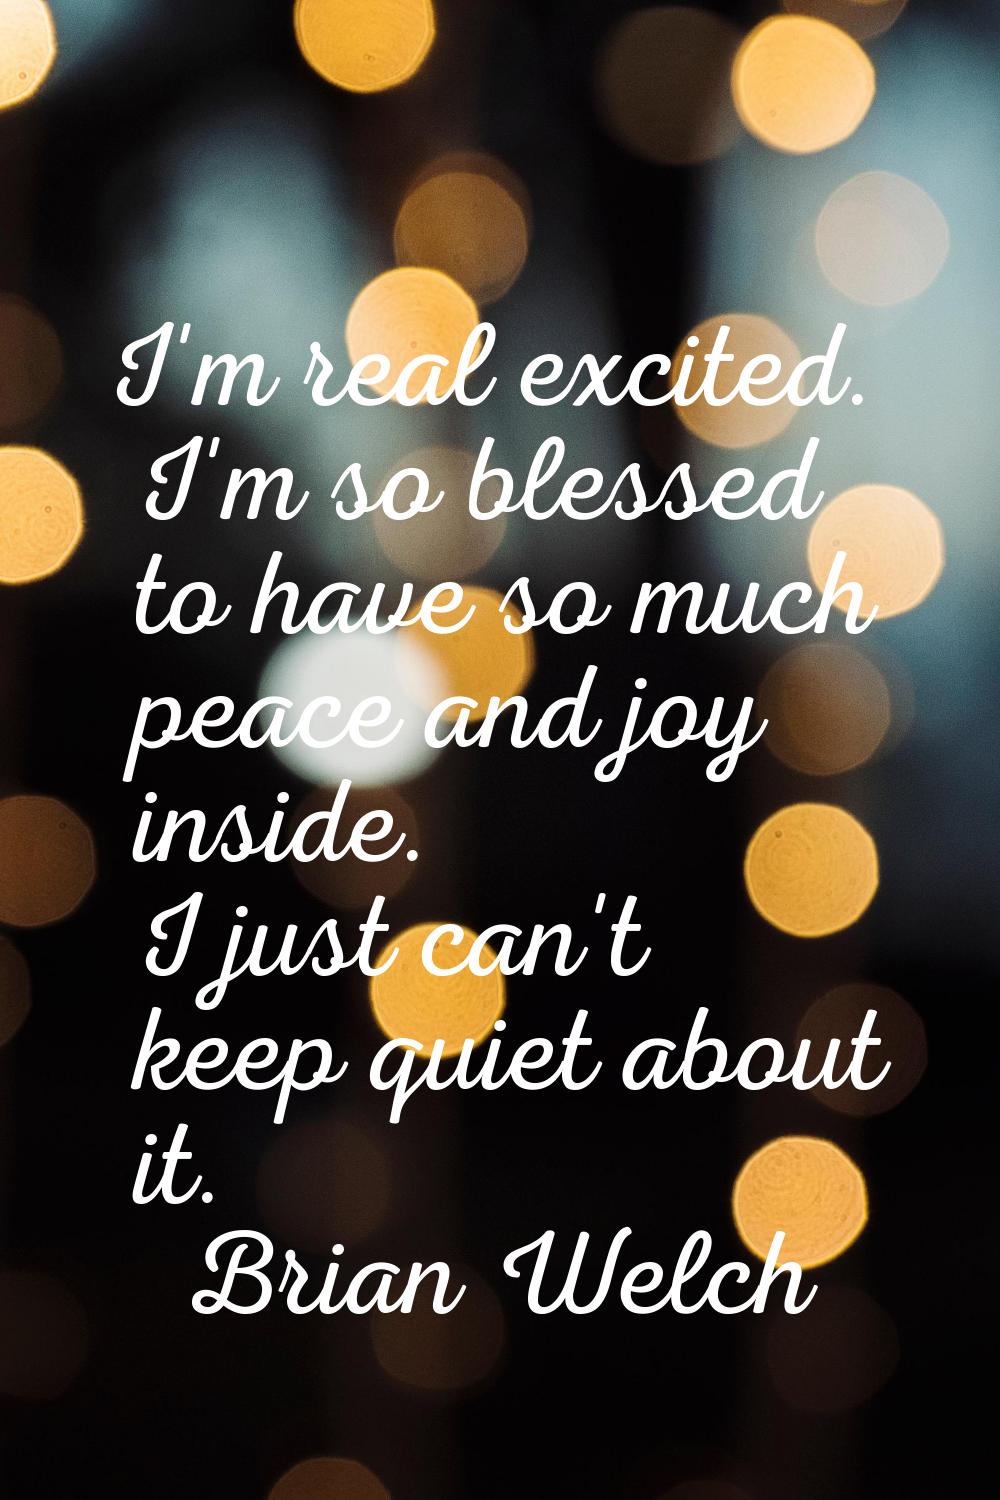 I'm real excited. I'm so blessed to have so much peace and joy inside. I just can't keep quiet abou